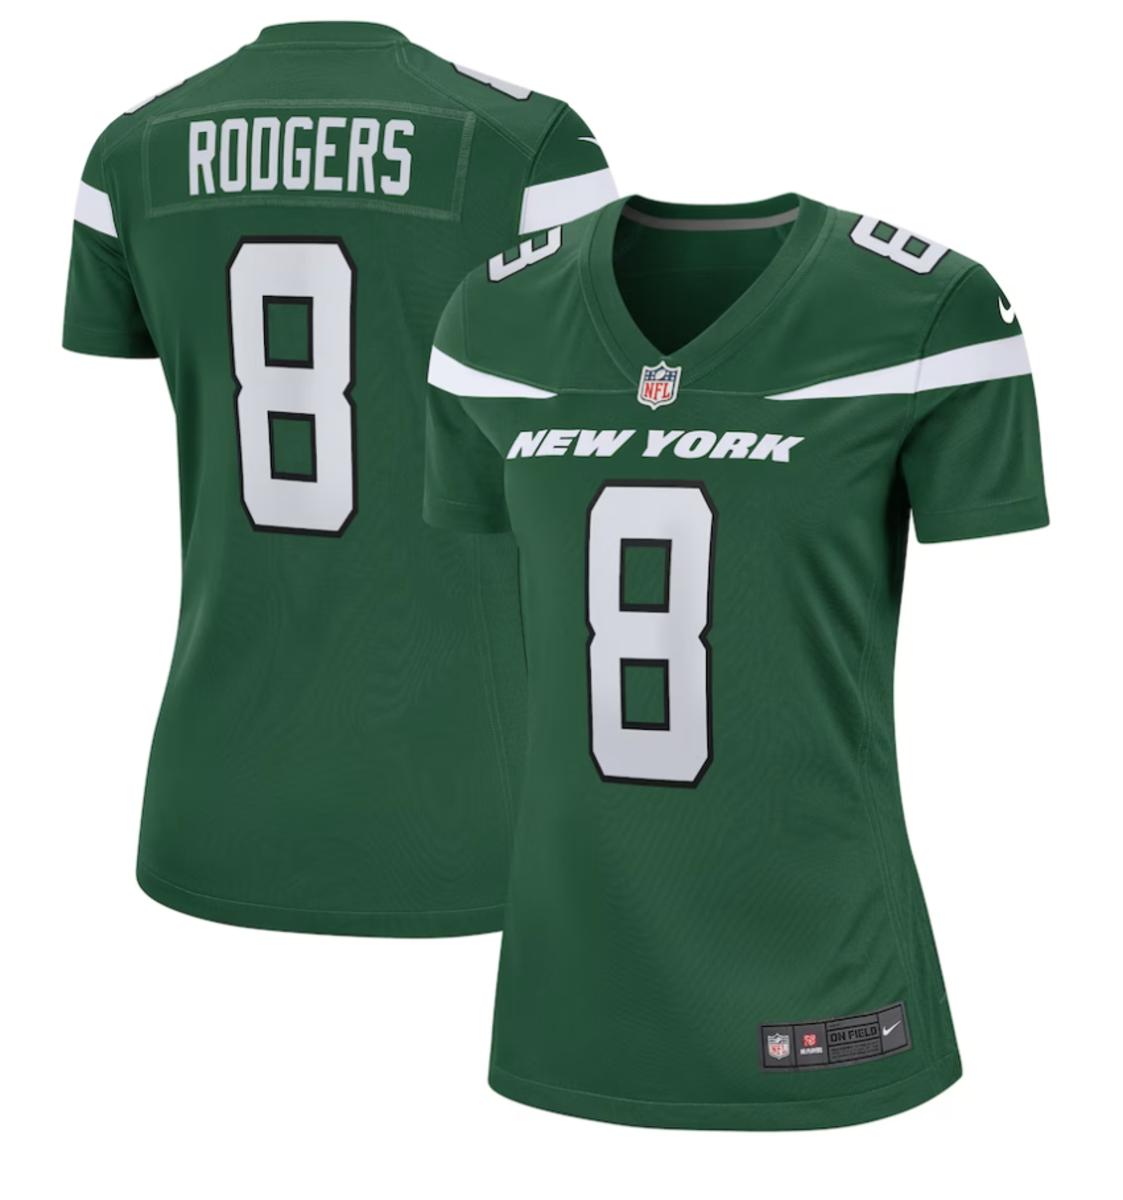 Aaron Rodgers New York Jets Nike Women's Game Jersey - $129.99